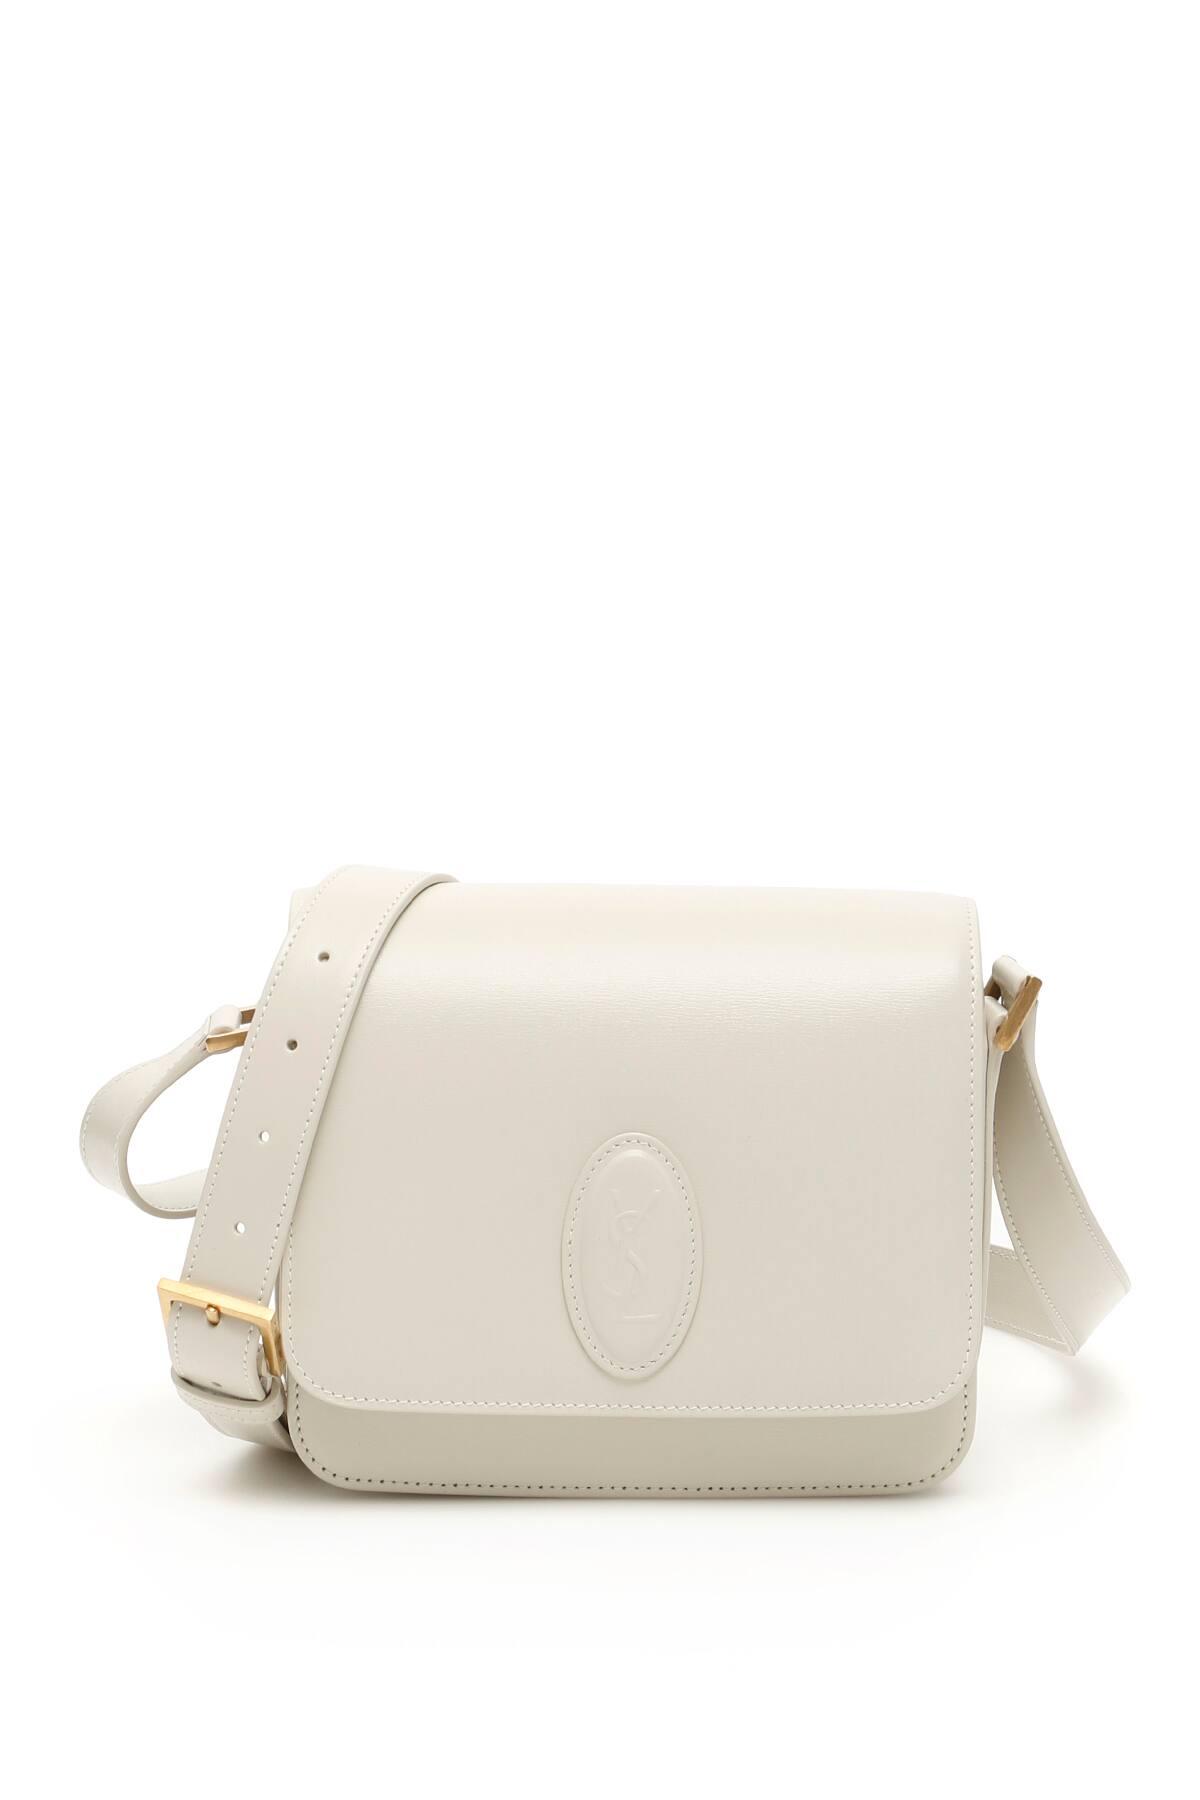 Saint Laurent Leather Le 61 Small Saddle Bag in White,Grey (White 